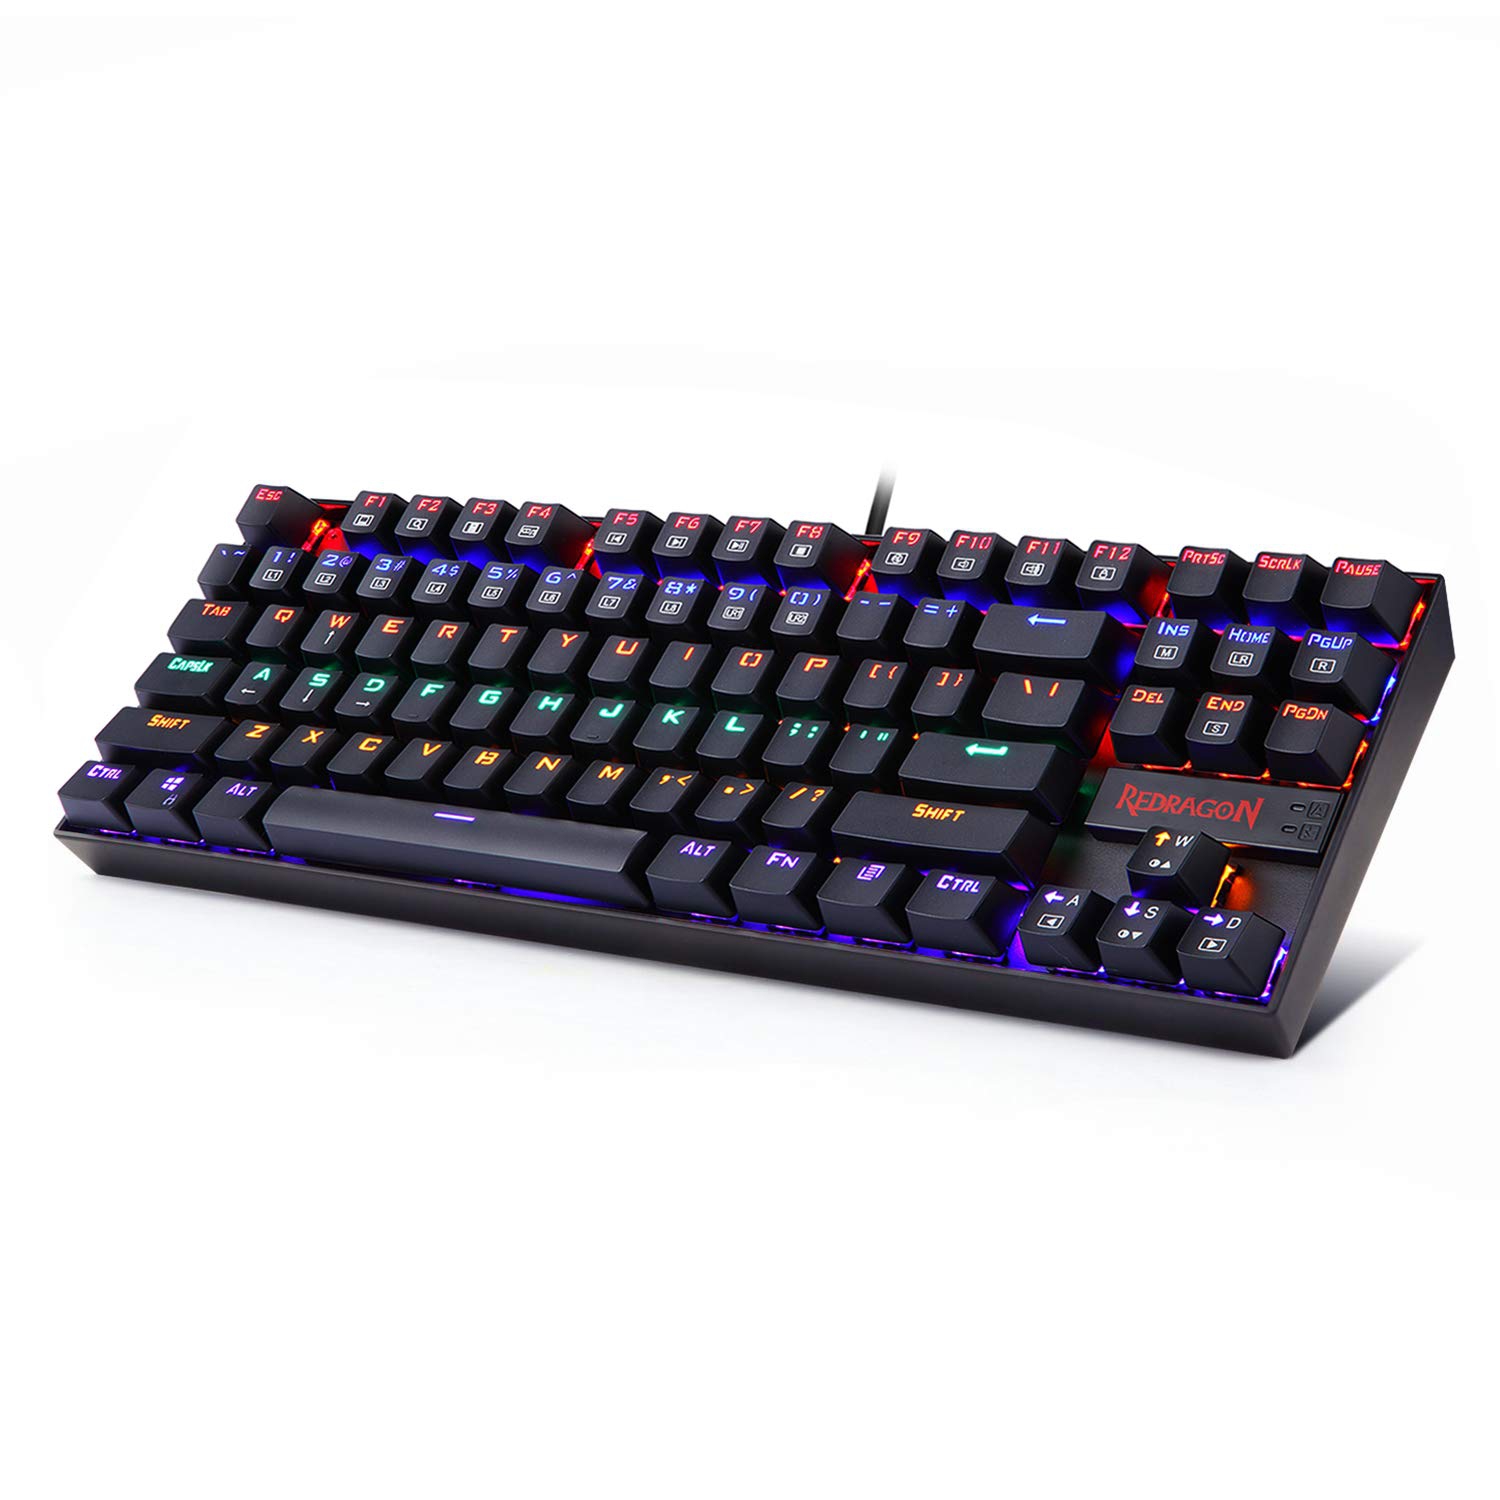 Redragon K552 Mechanical Gaming Keyboard RGB LED Rainbow Backlit Wired Keyboard with Red Switches for Windows Gaming PC (87